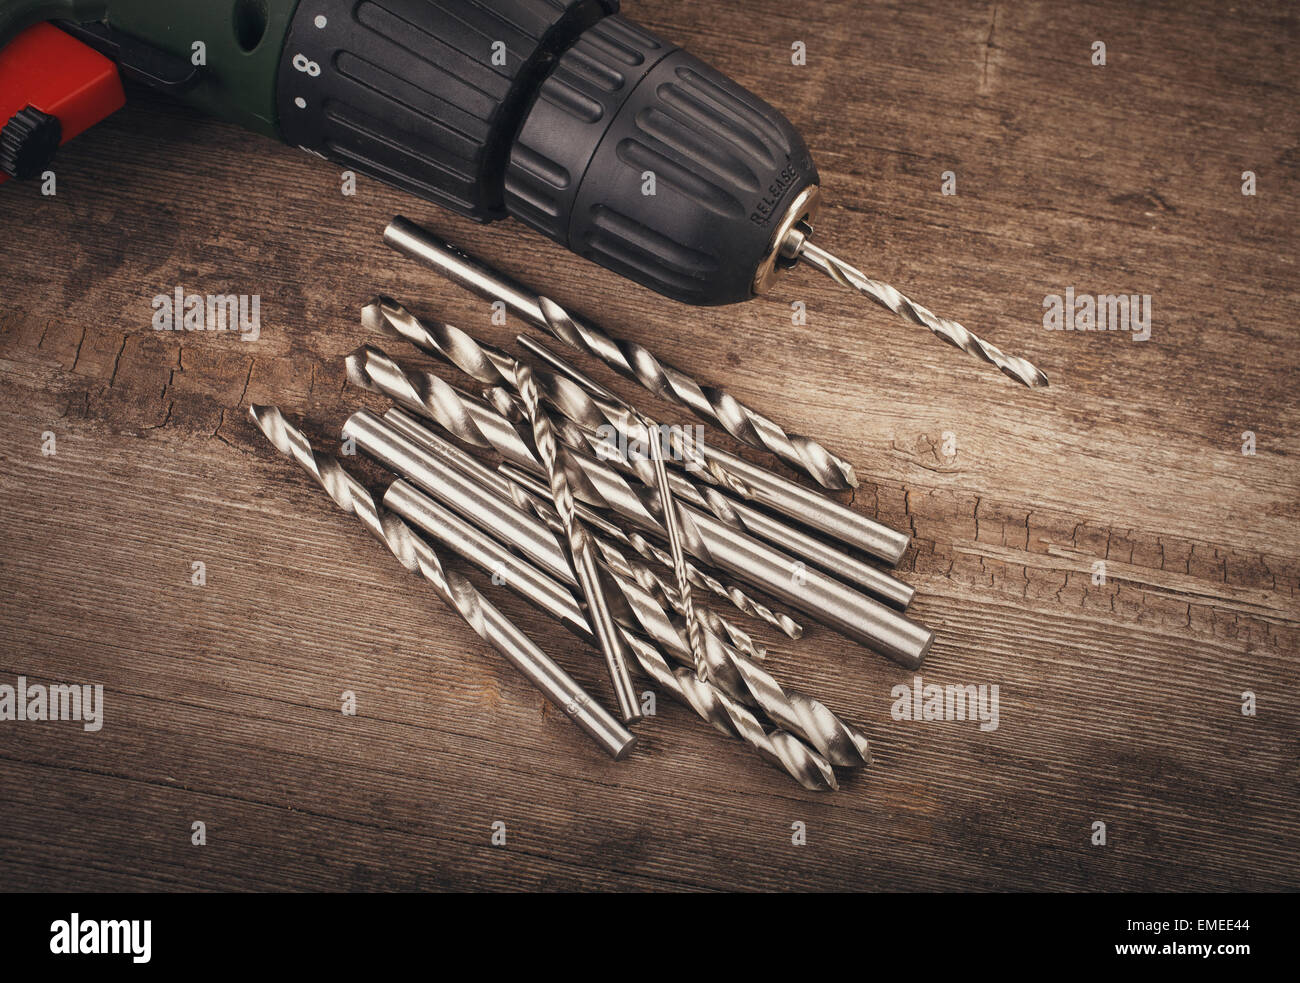 Drill and set of drill bits Stock Photo